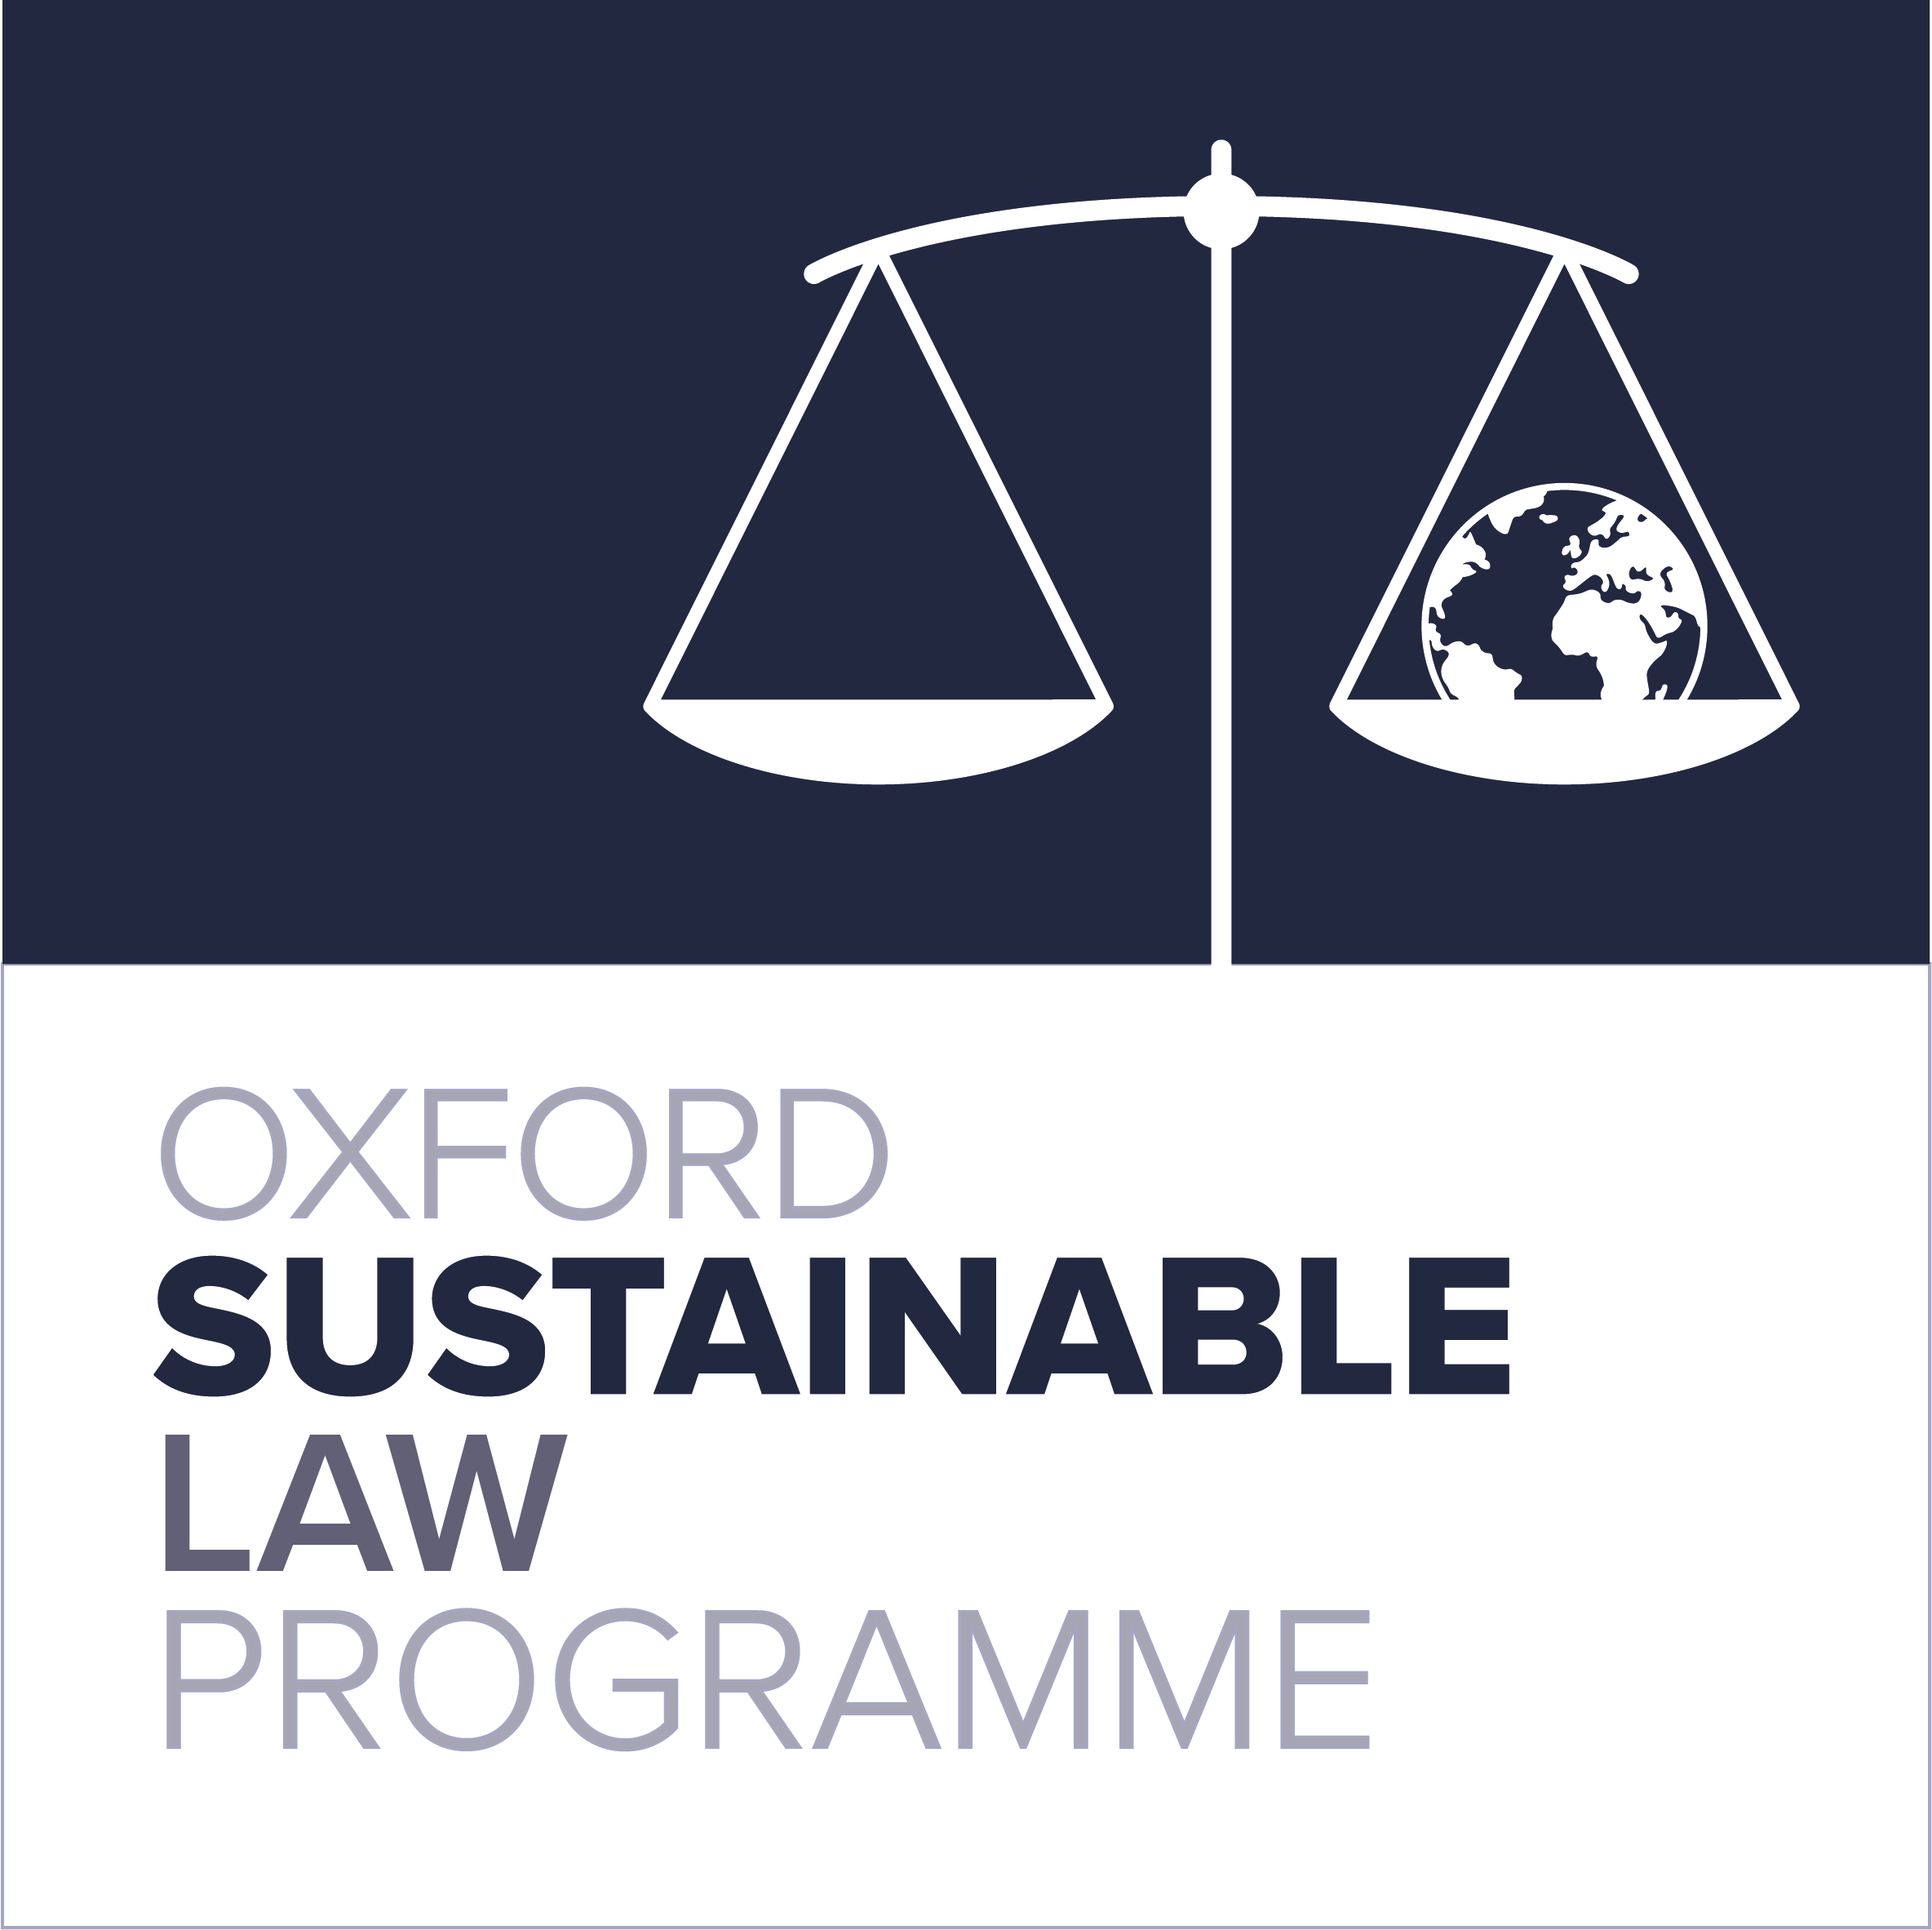 Oxford Sustainable Law Programme logo